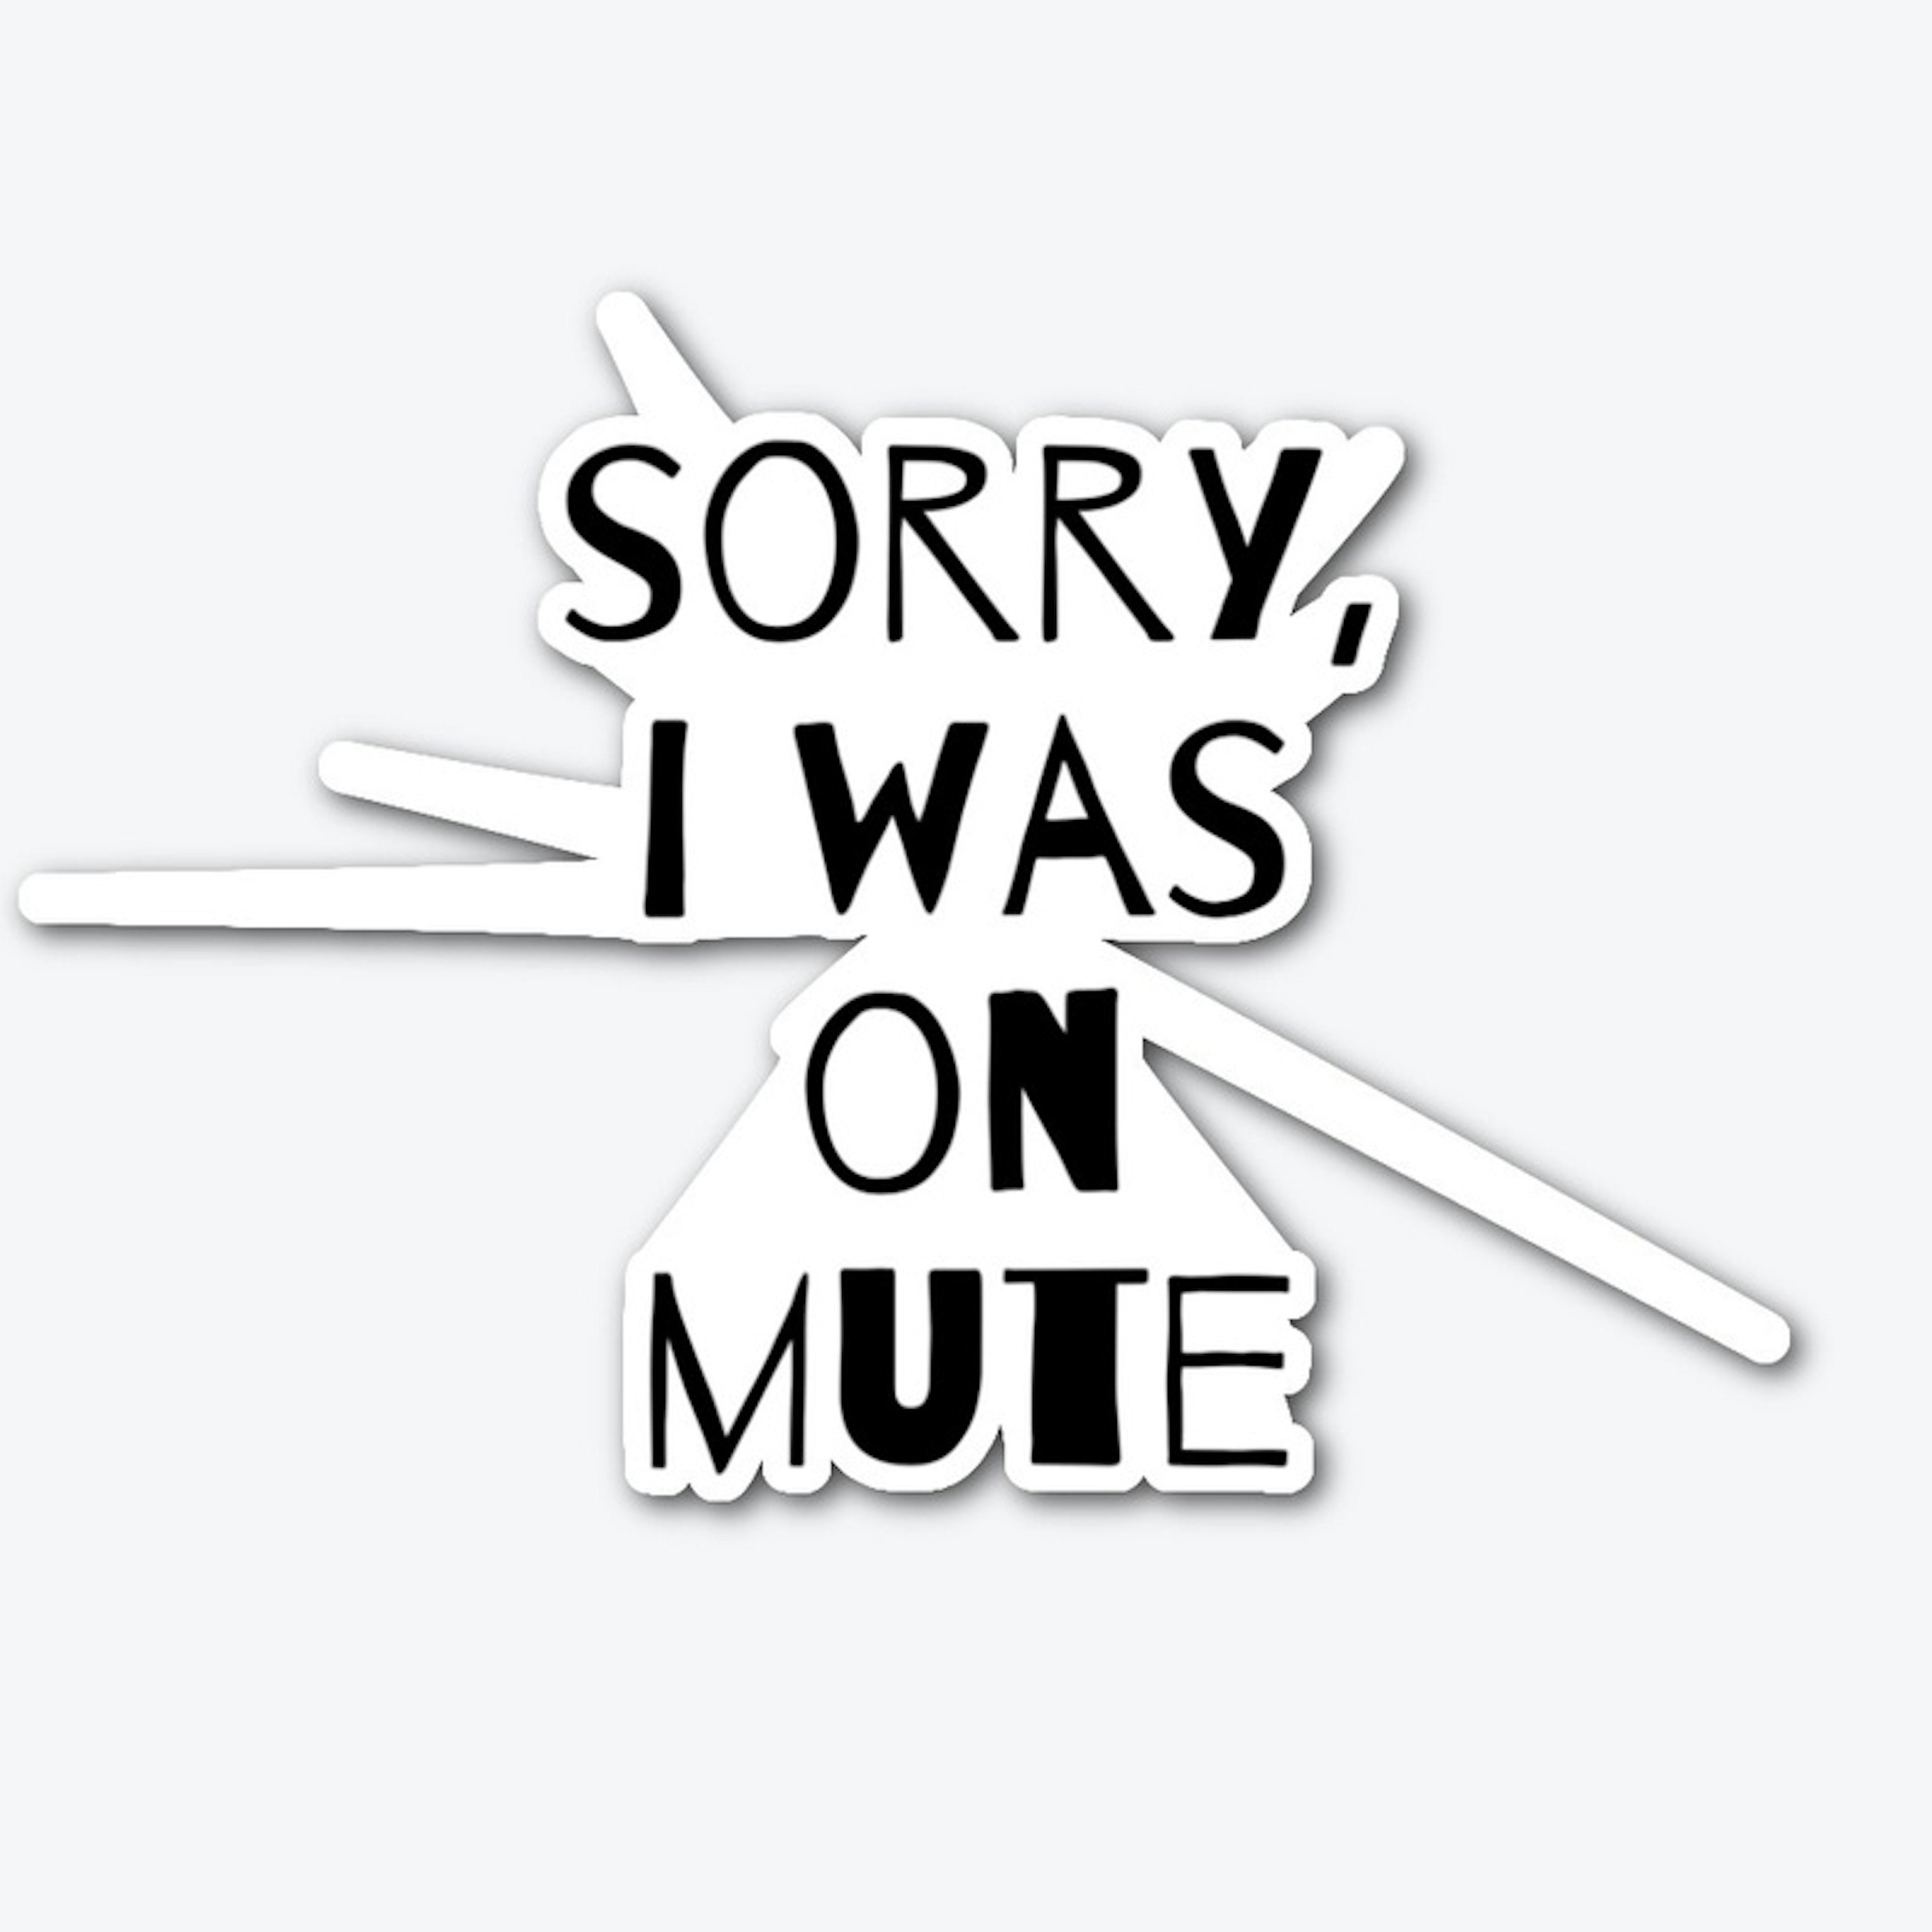 Sorry, I was on MUTE!